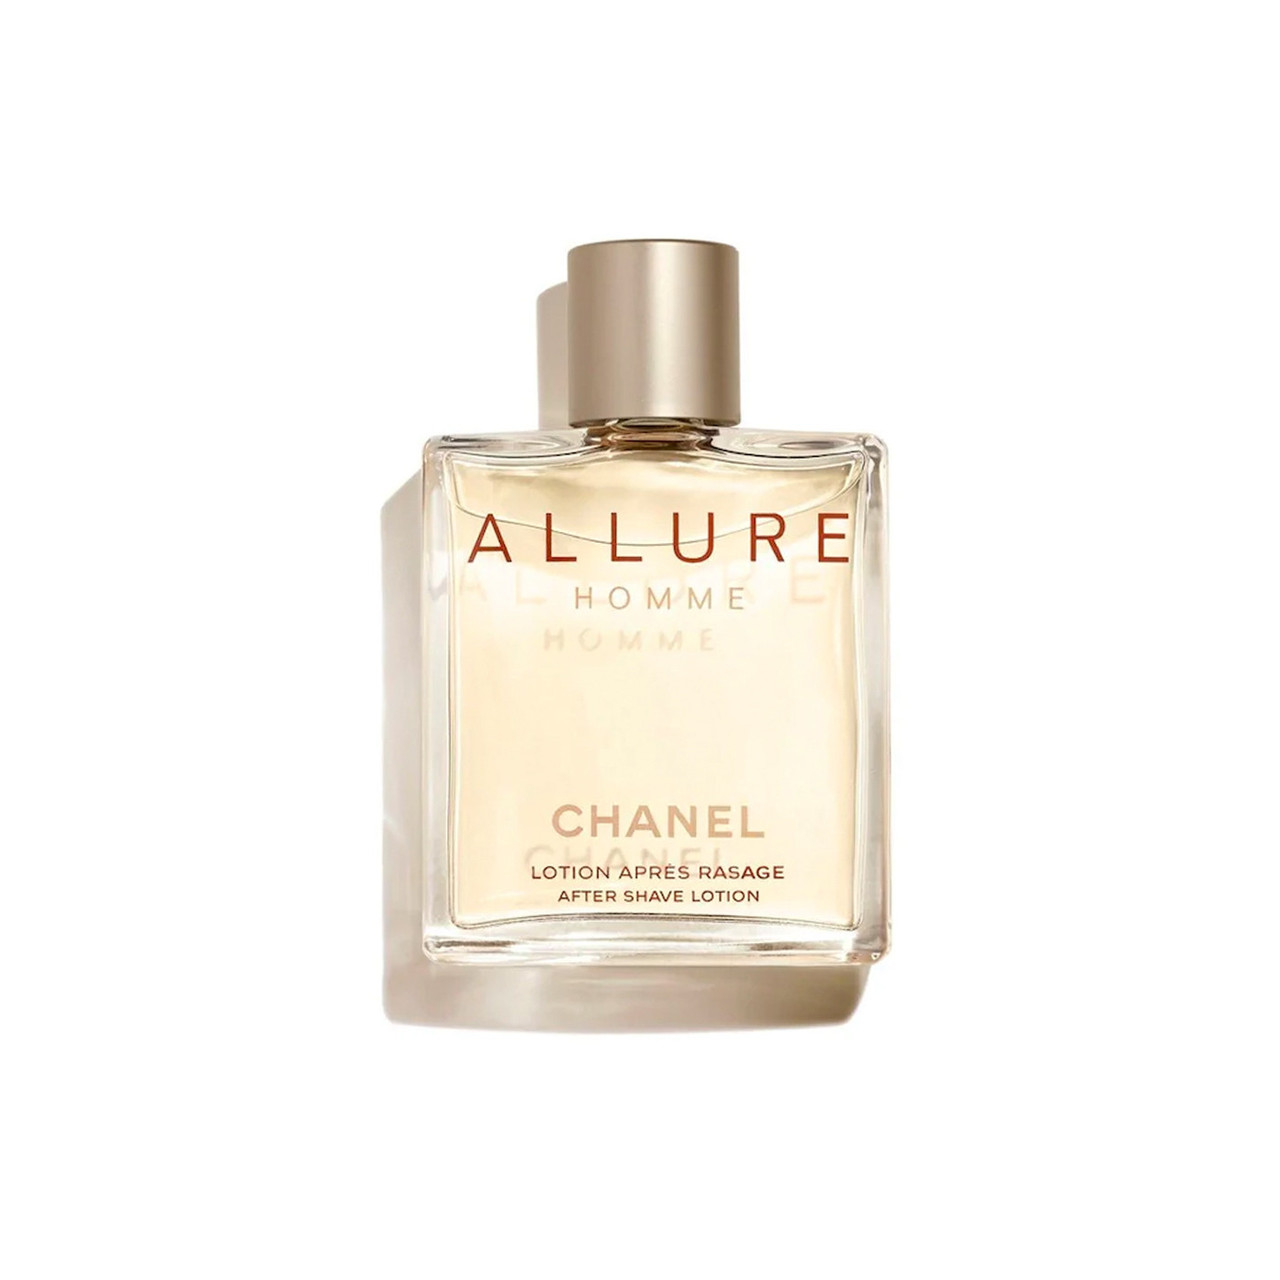 CHANEL ALLURE HOMME 3.4 AFTER SHAVE LOTION